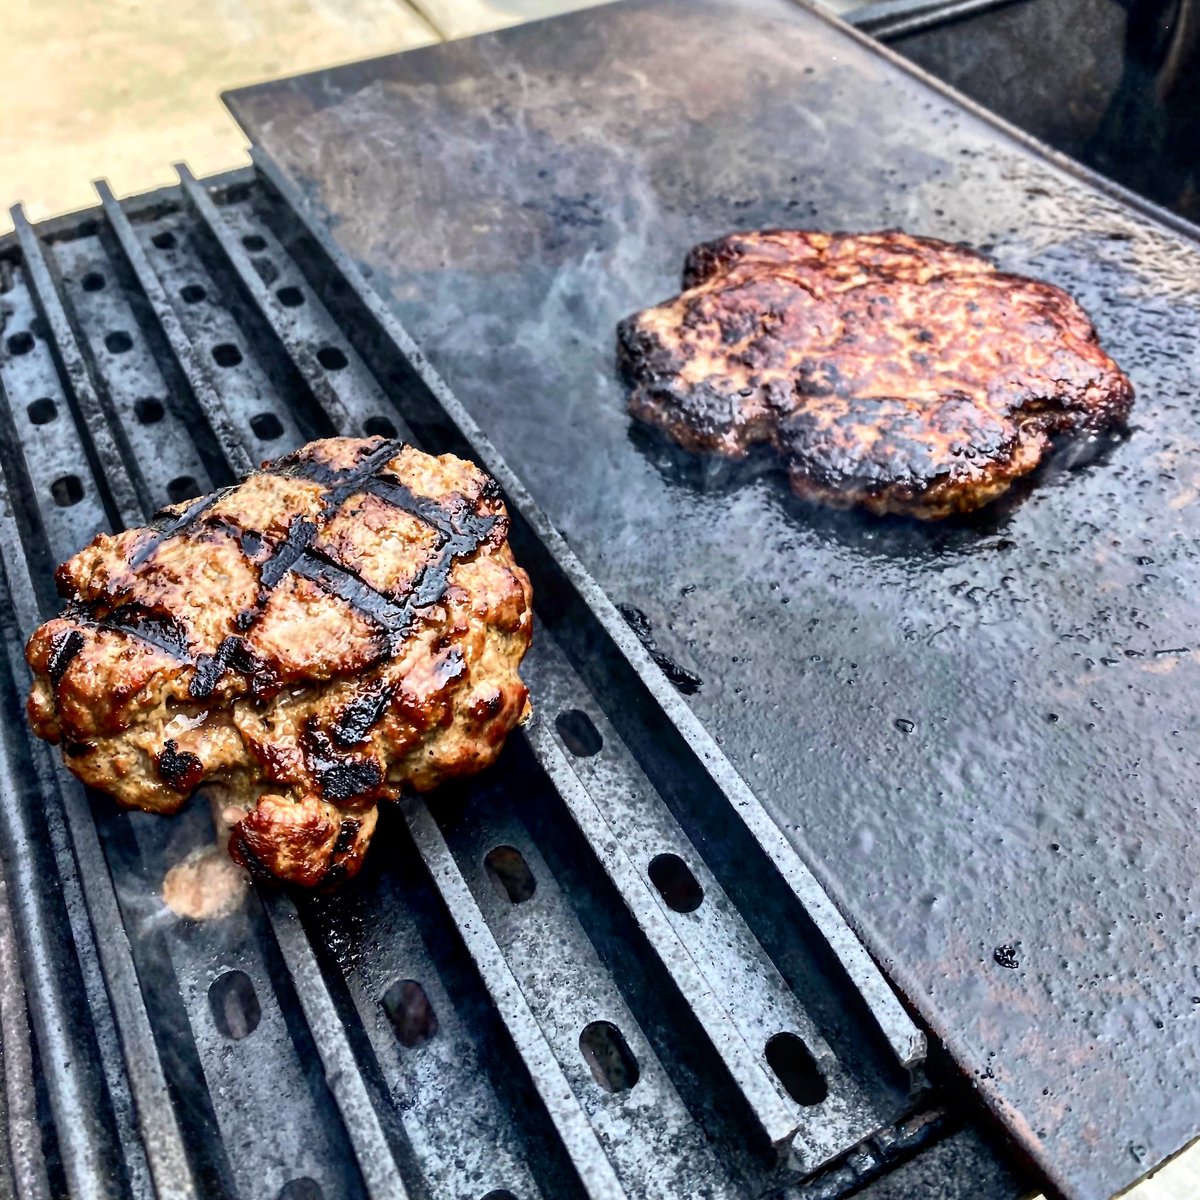 One kid wanted their #burger one way and of course the other wanted it the other way.  #StayInCookout @GrillGrate @pkgrills